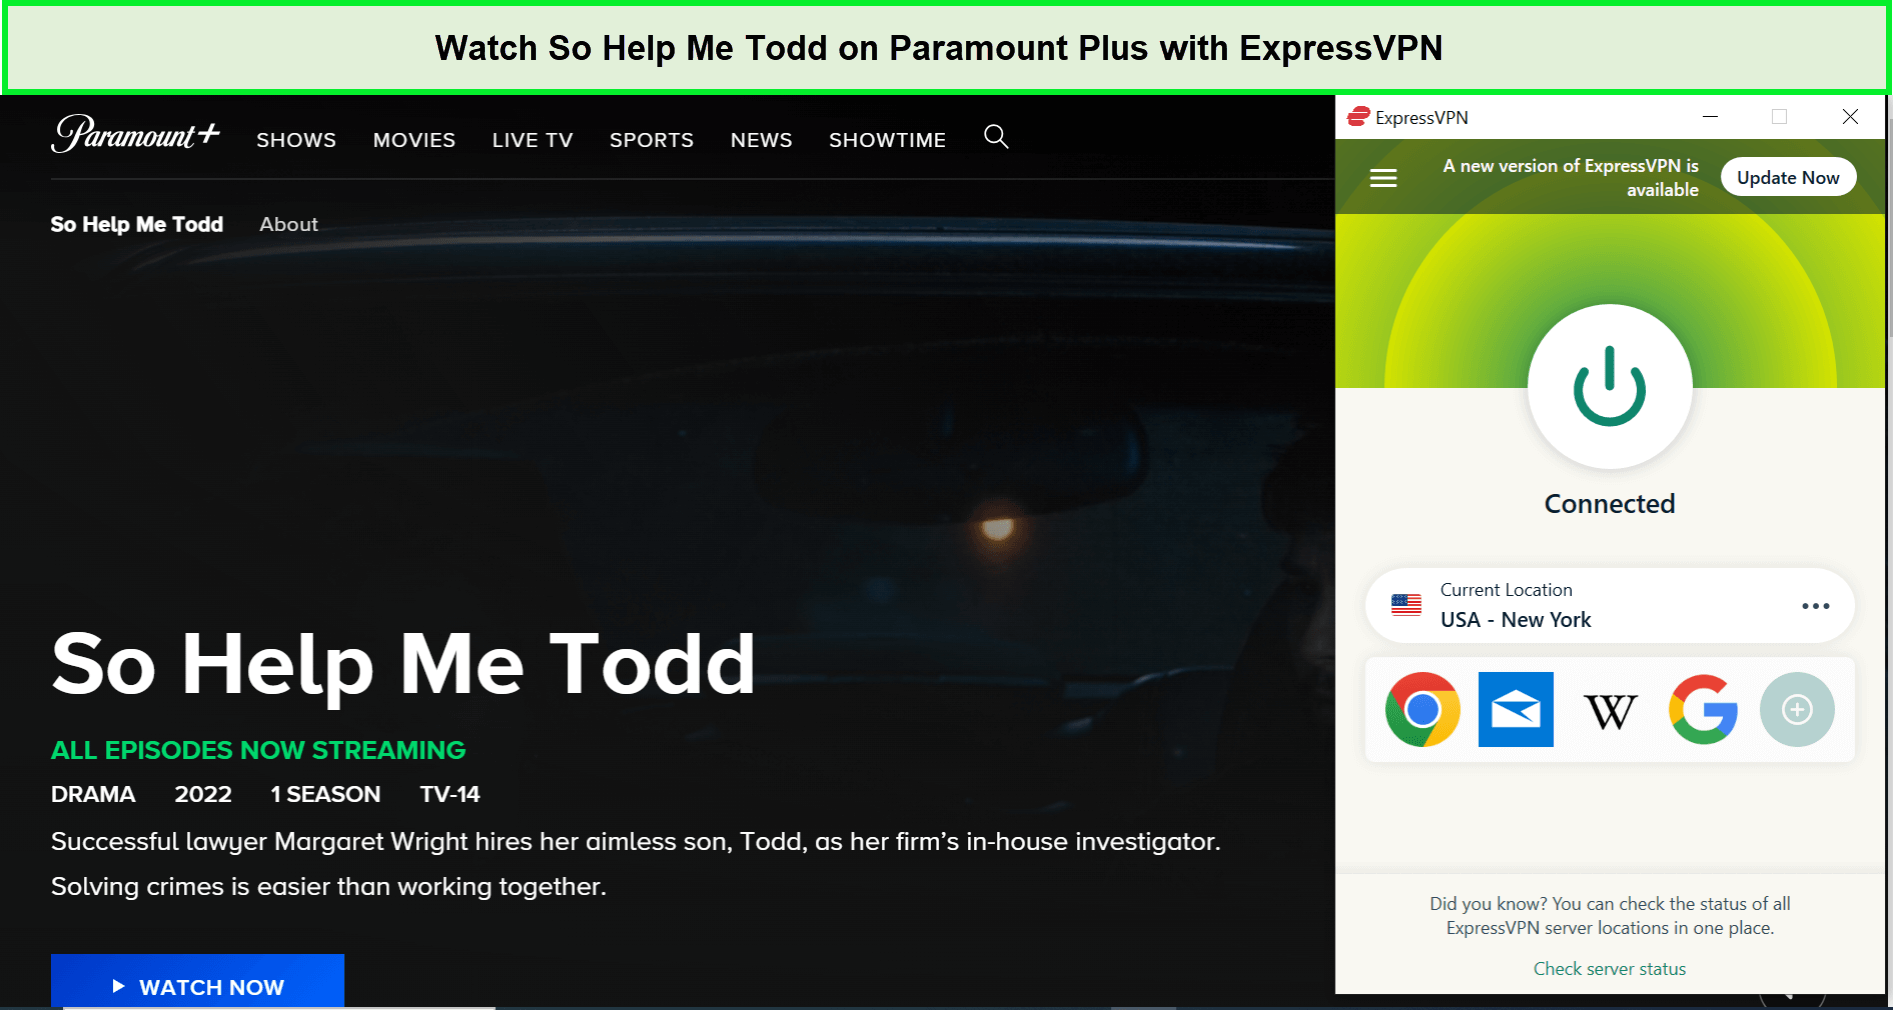 Watch-So-Help-Me-Todd-in-UK-on-Paramount-Plus-with-ExpressVPN